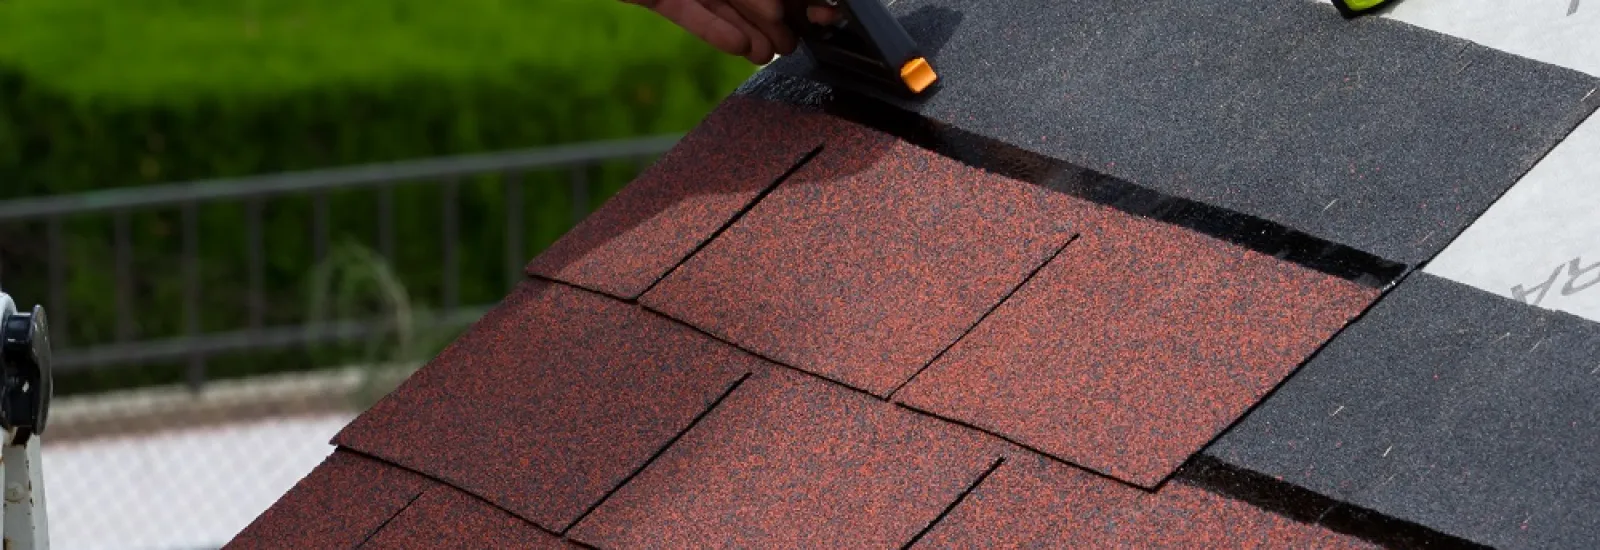 A Guide to Choosing an Asphalt Roof Color